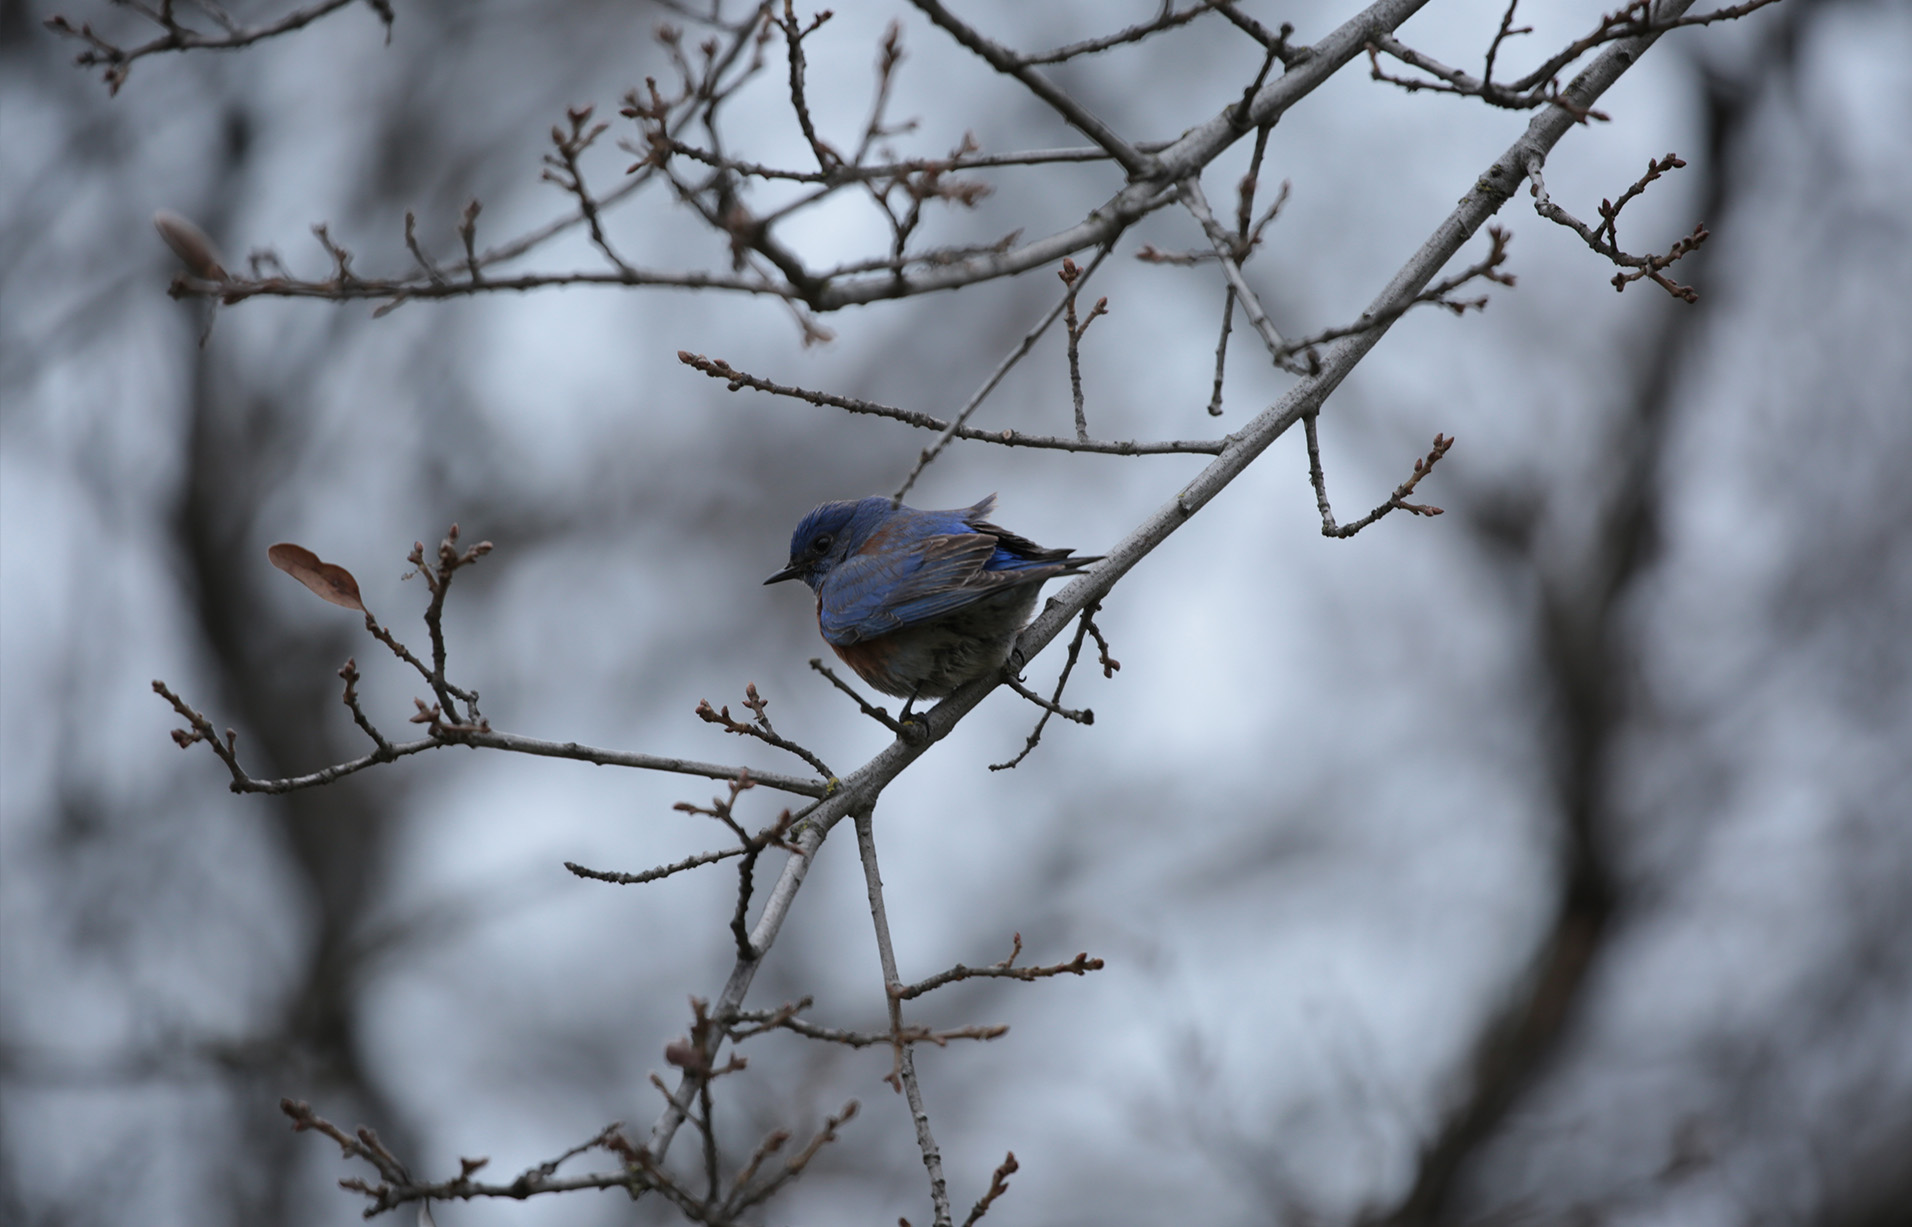 A small bird sheltering from the weather